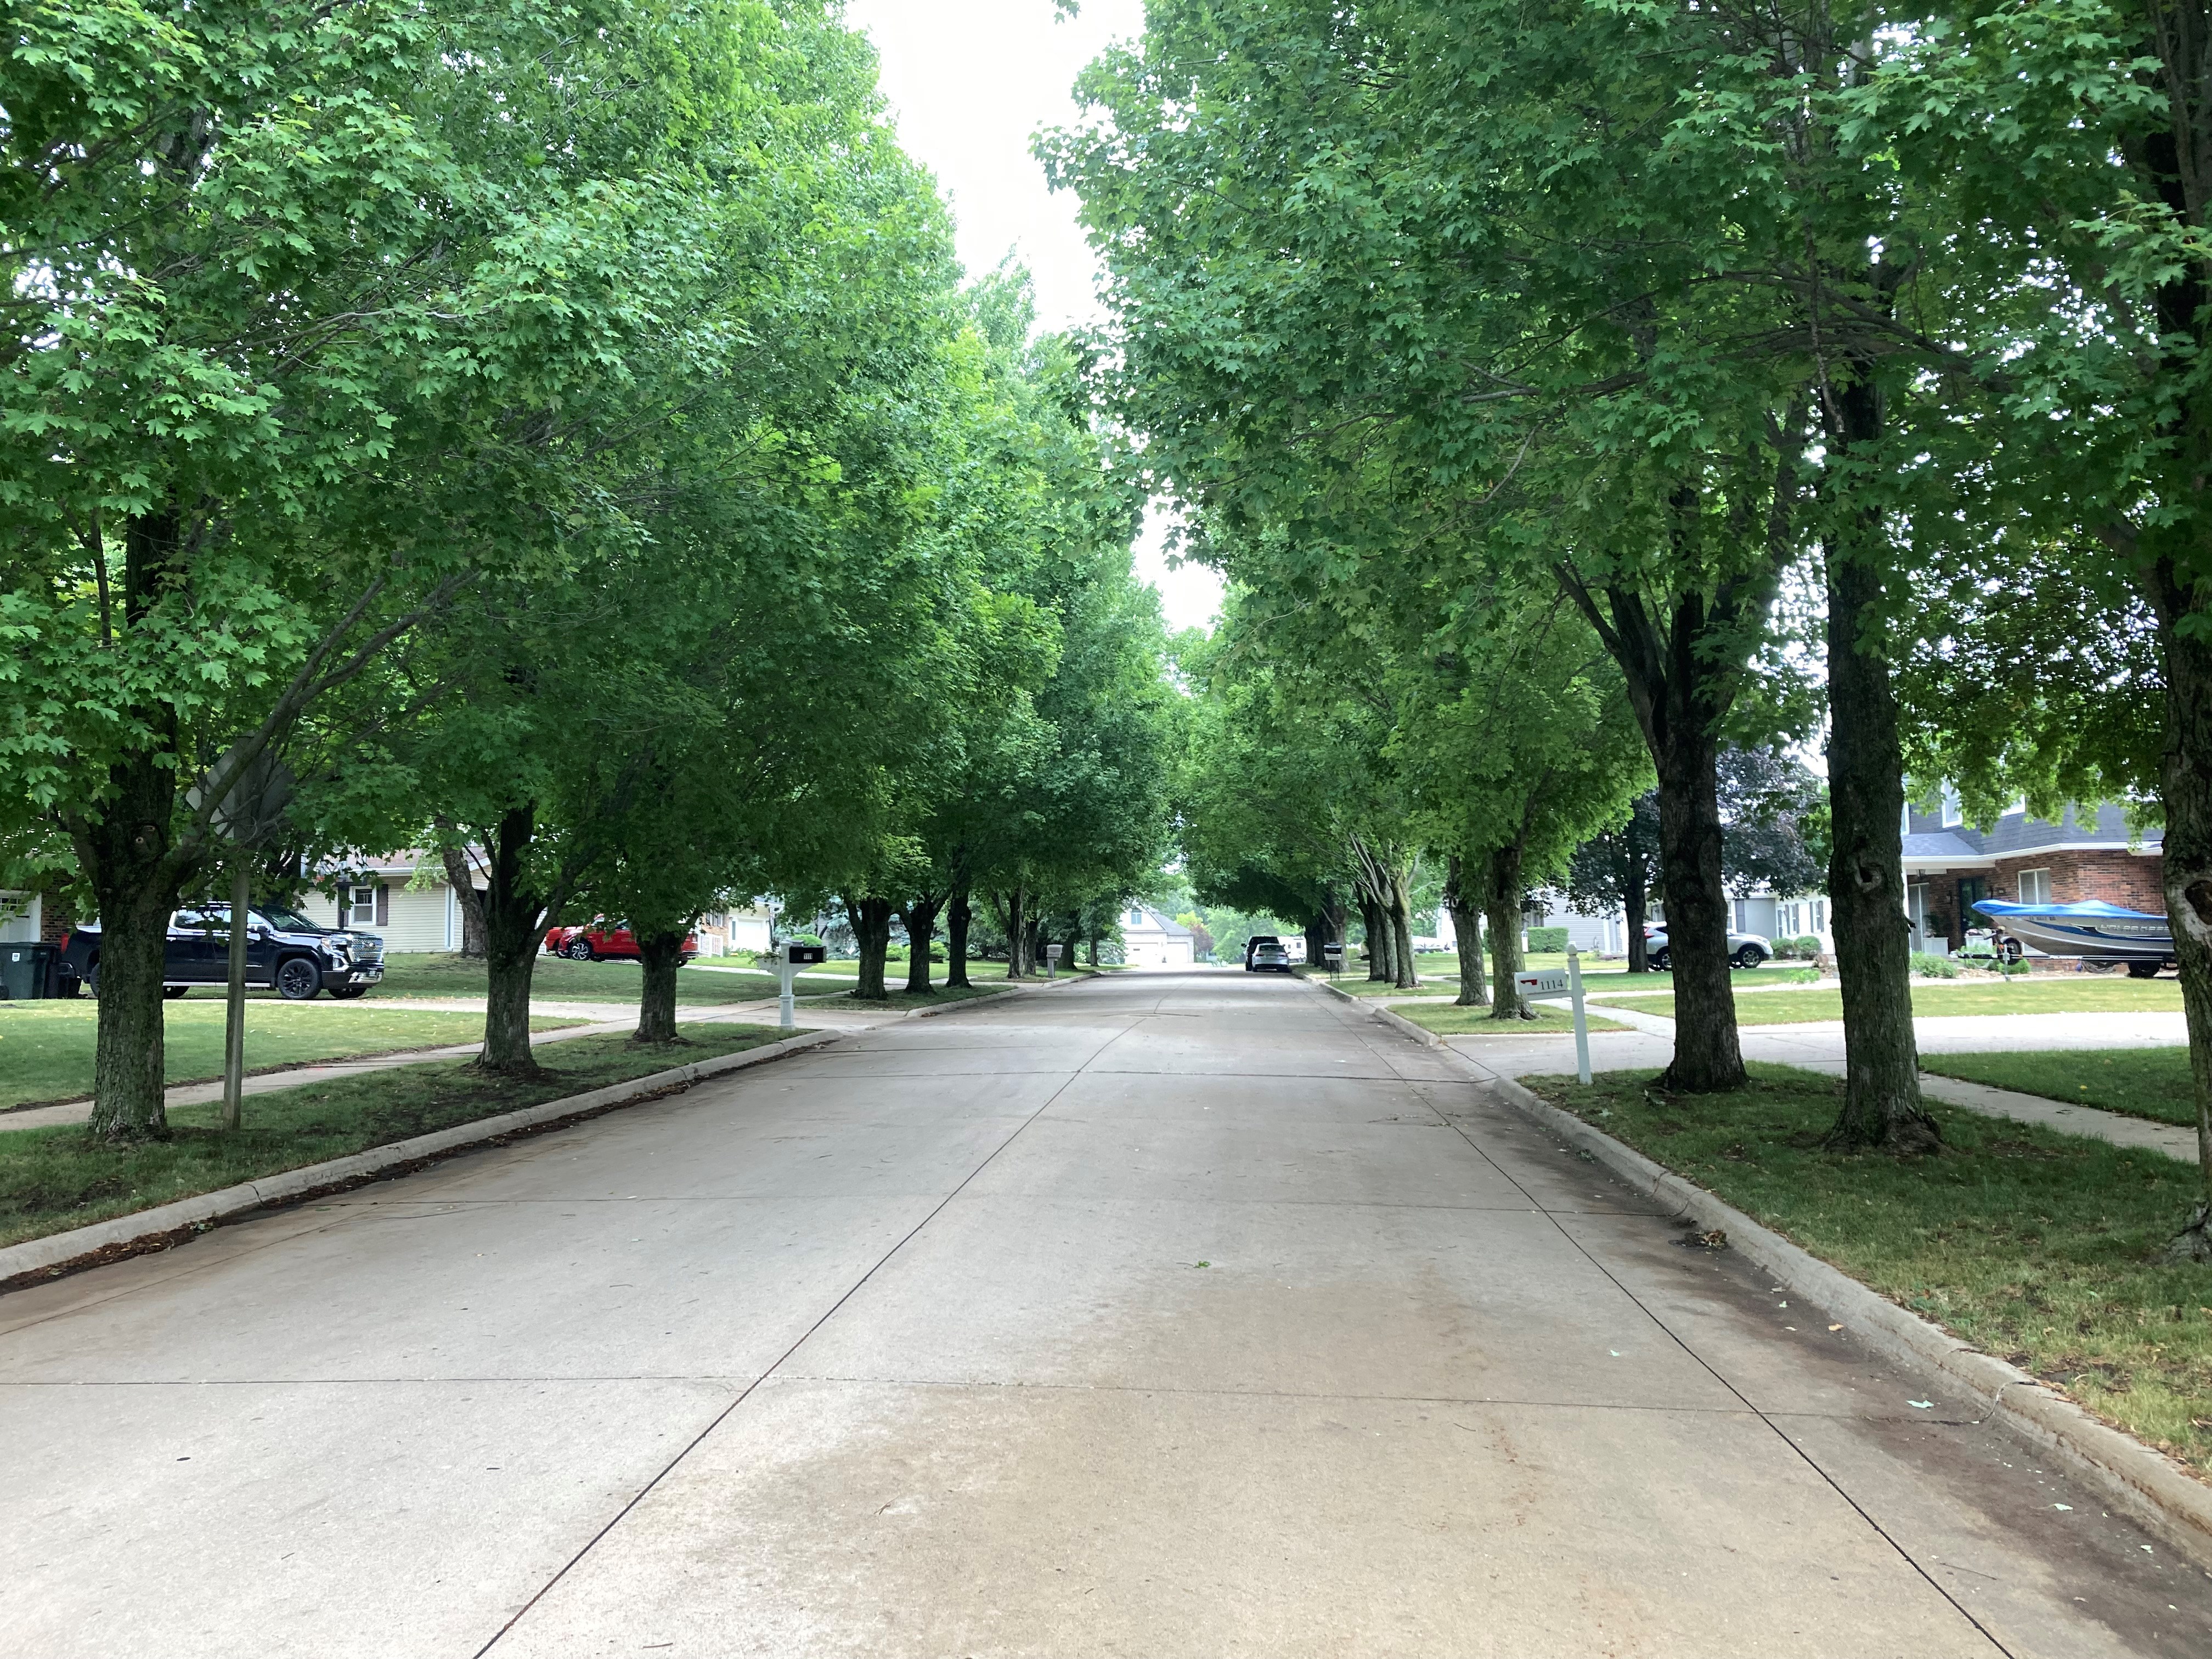 Street lined with mature trees, providing ample shade